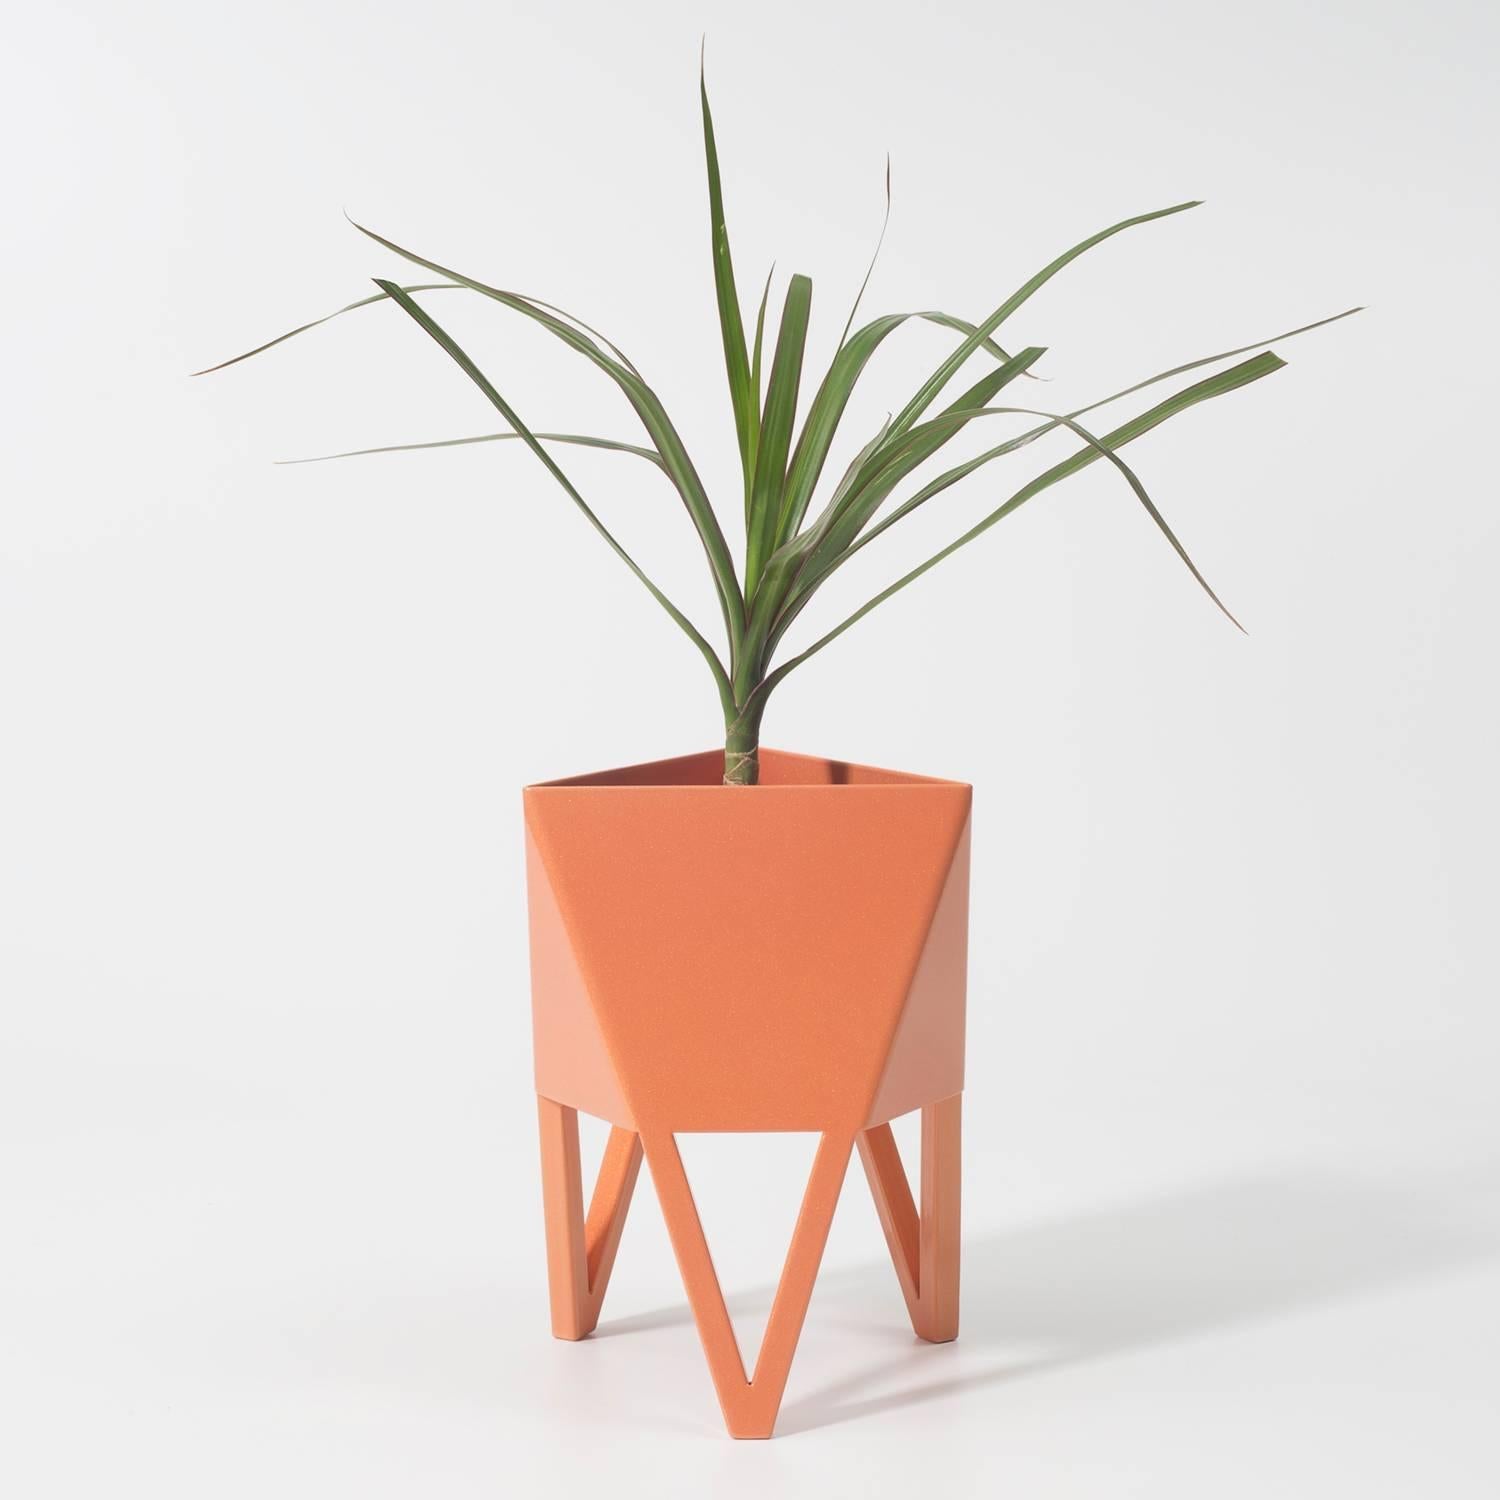 Deca Planter in Light Pink Steel, Large, by Force/Collide 3